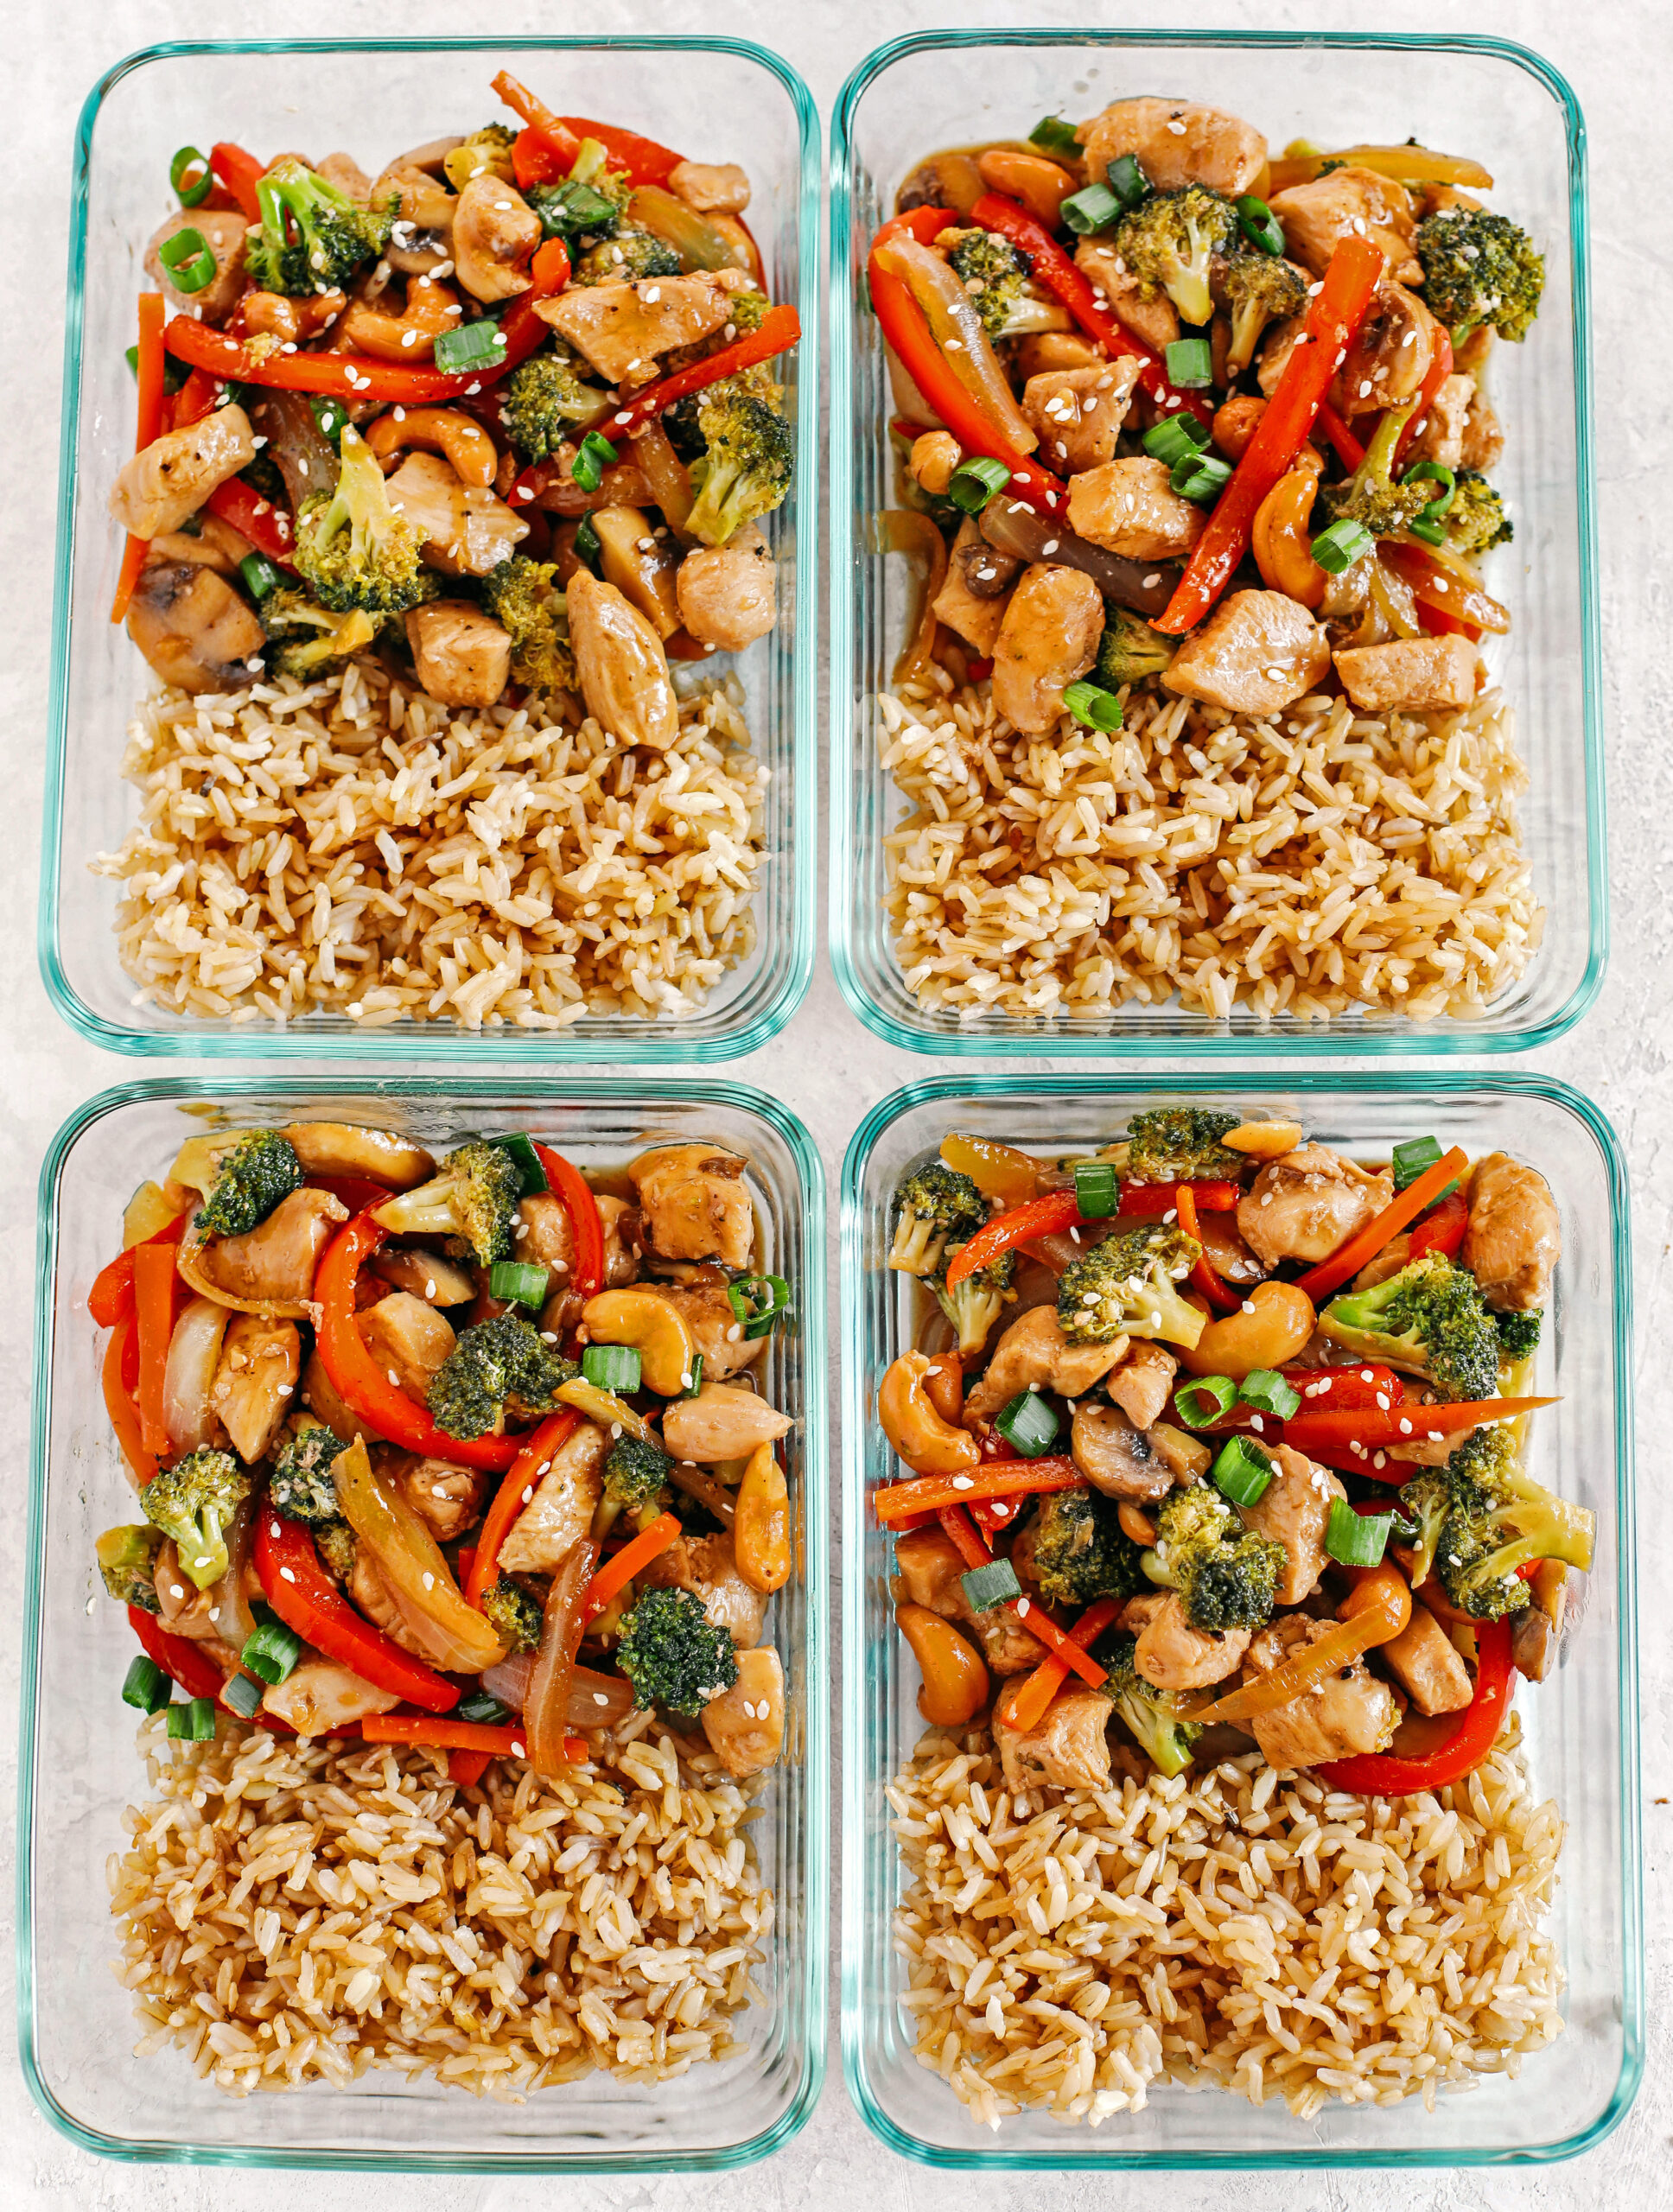 This Teriyaki Chicken Stir Fry is the perfect weeknight meal that is quick and easy to make, full of fresh veggies and tossed together in a delicious homemade teriyaki sauce!